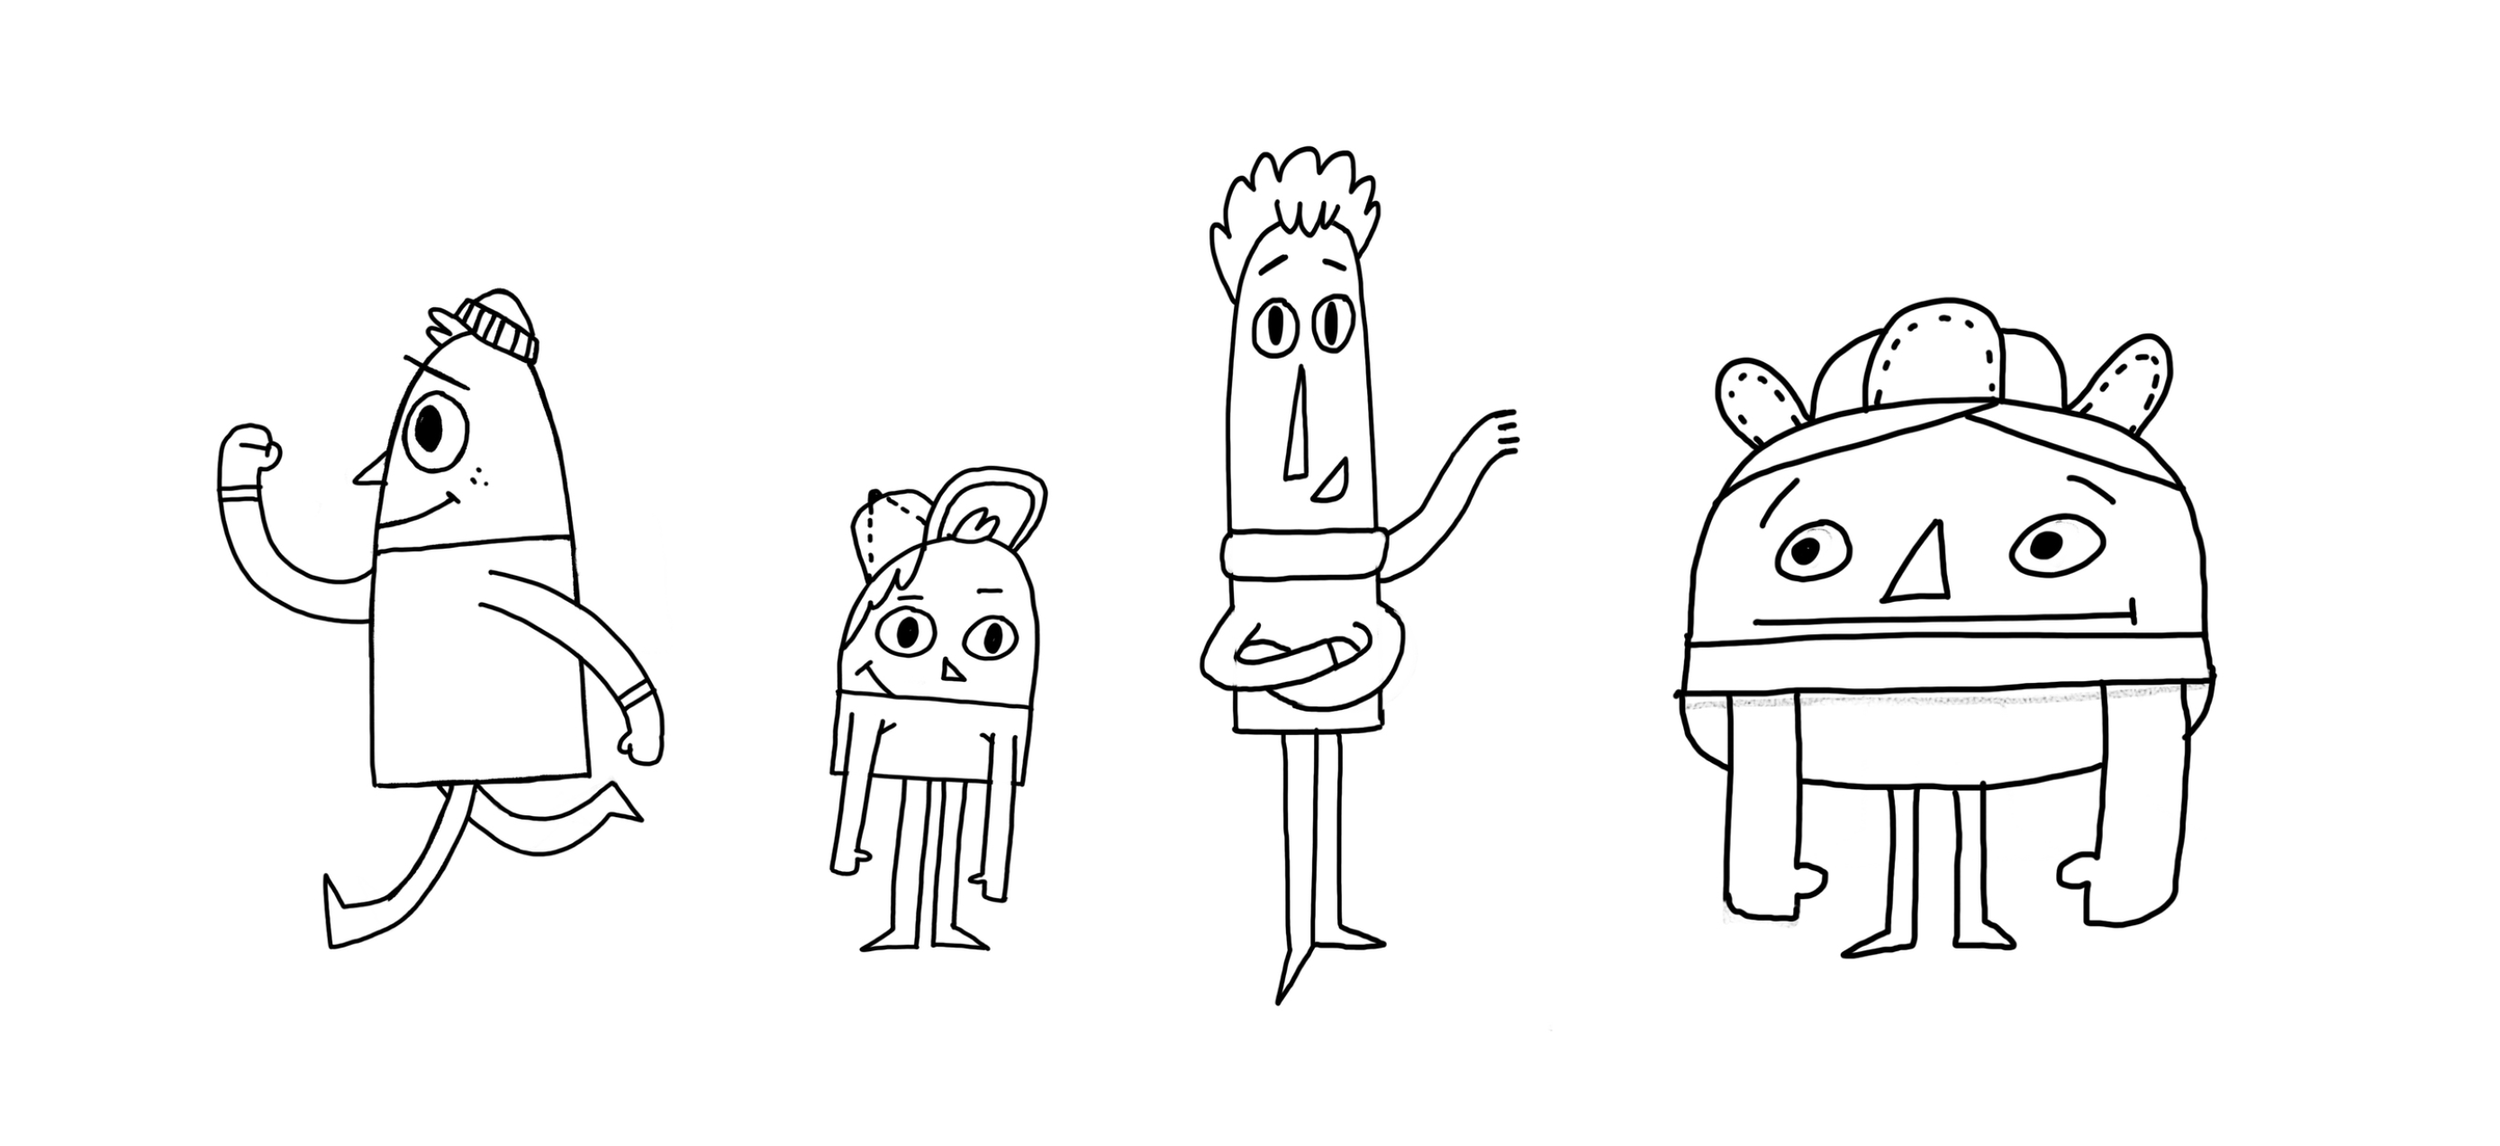 PBSKids+charactersketches.png